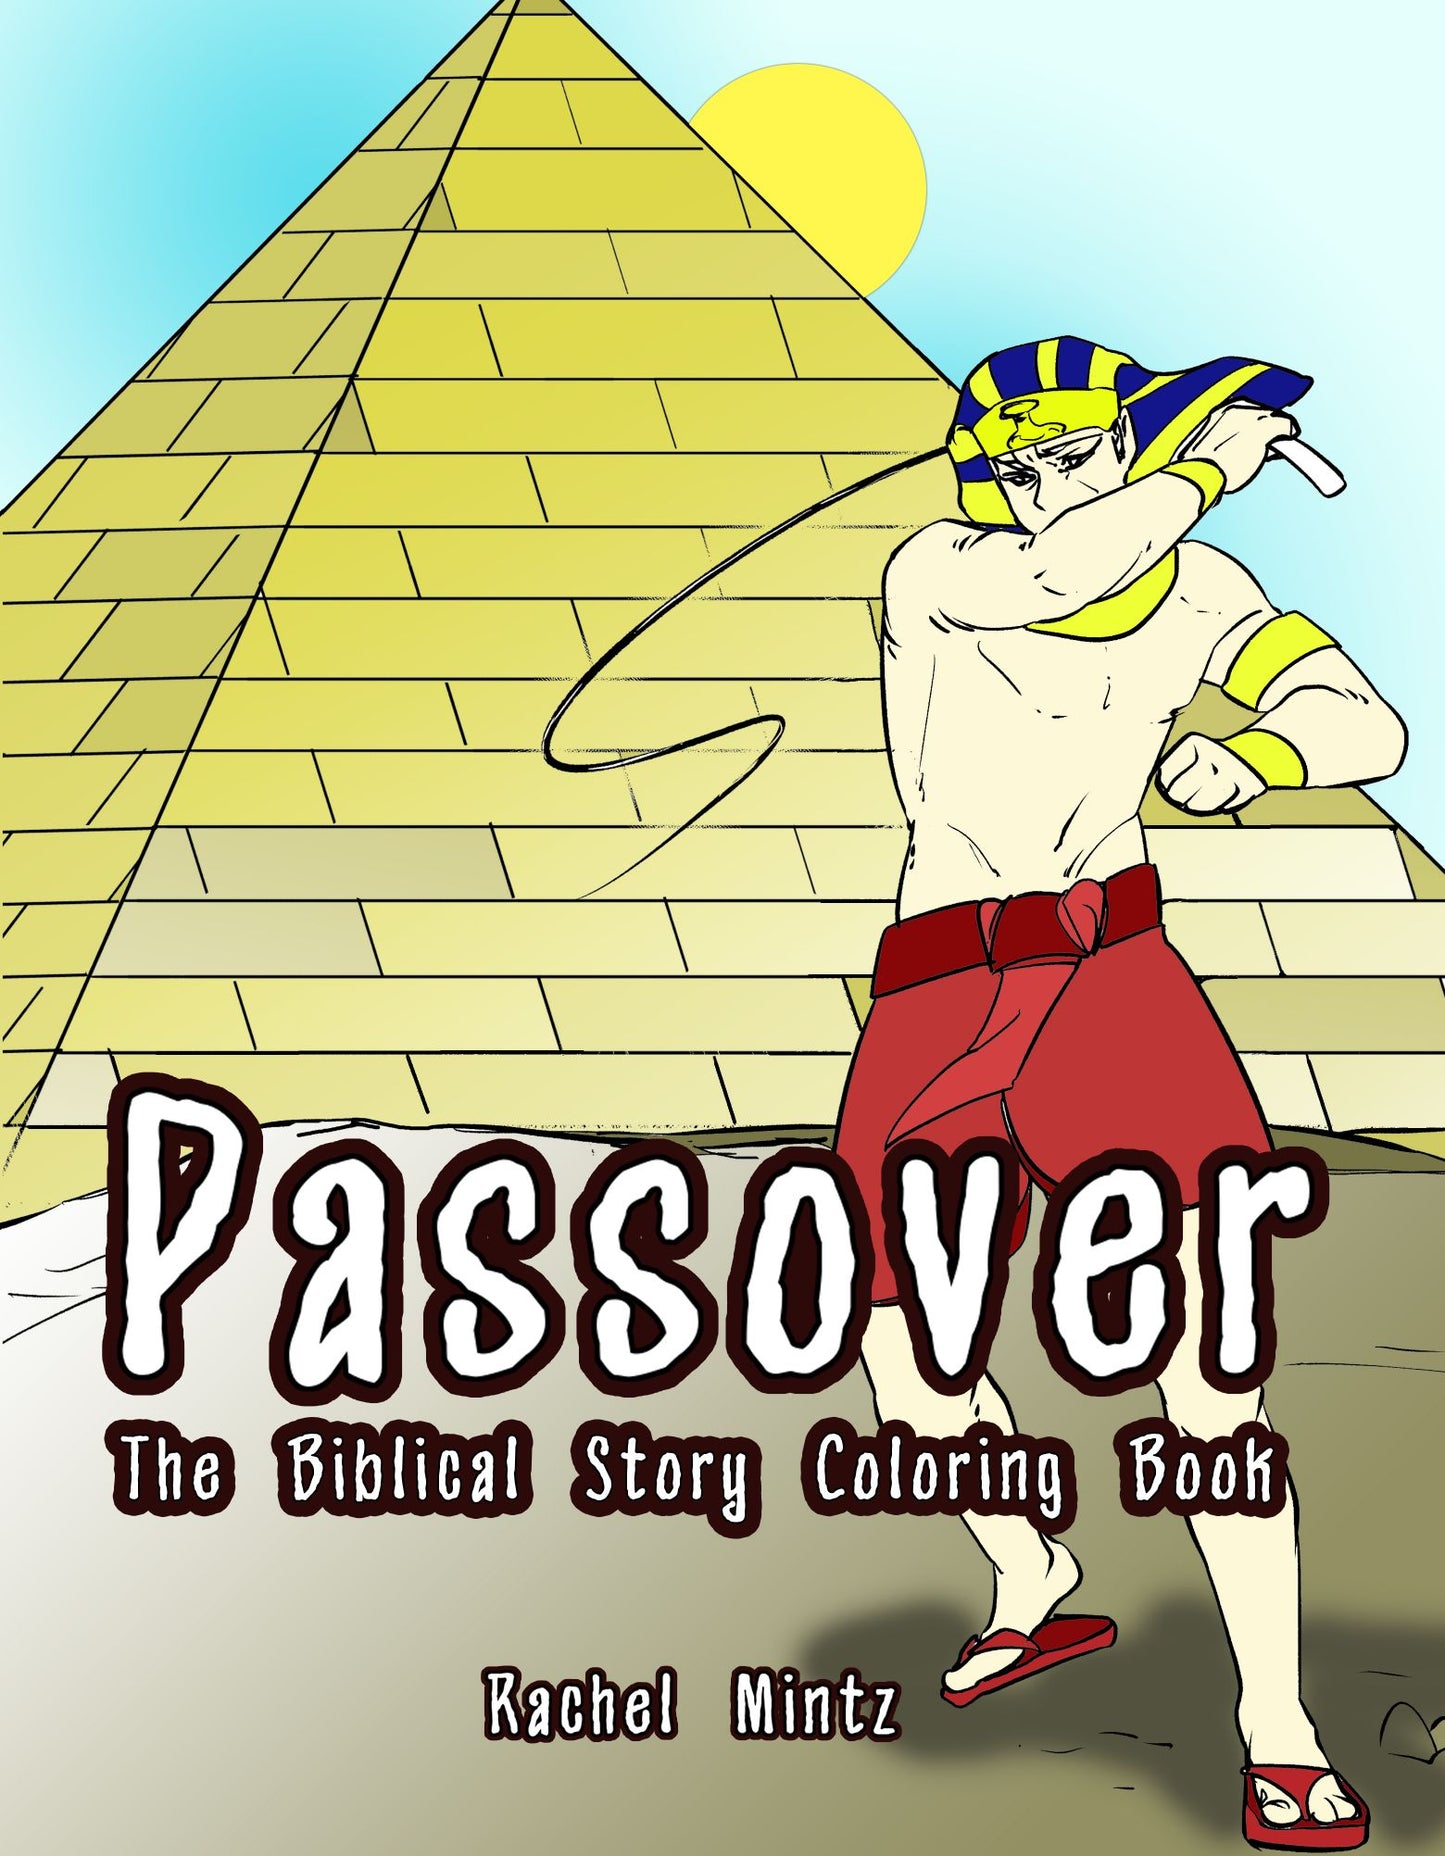 Passover Coloring Book + The Biblical Story (Printable PDF Book)